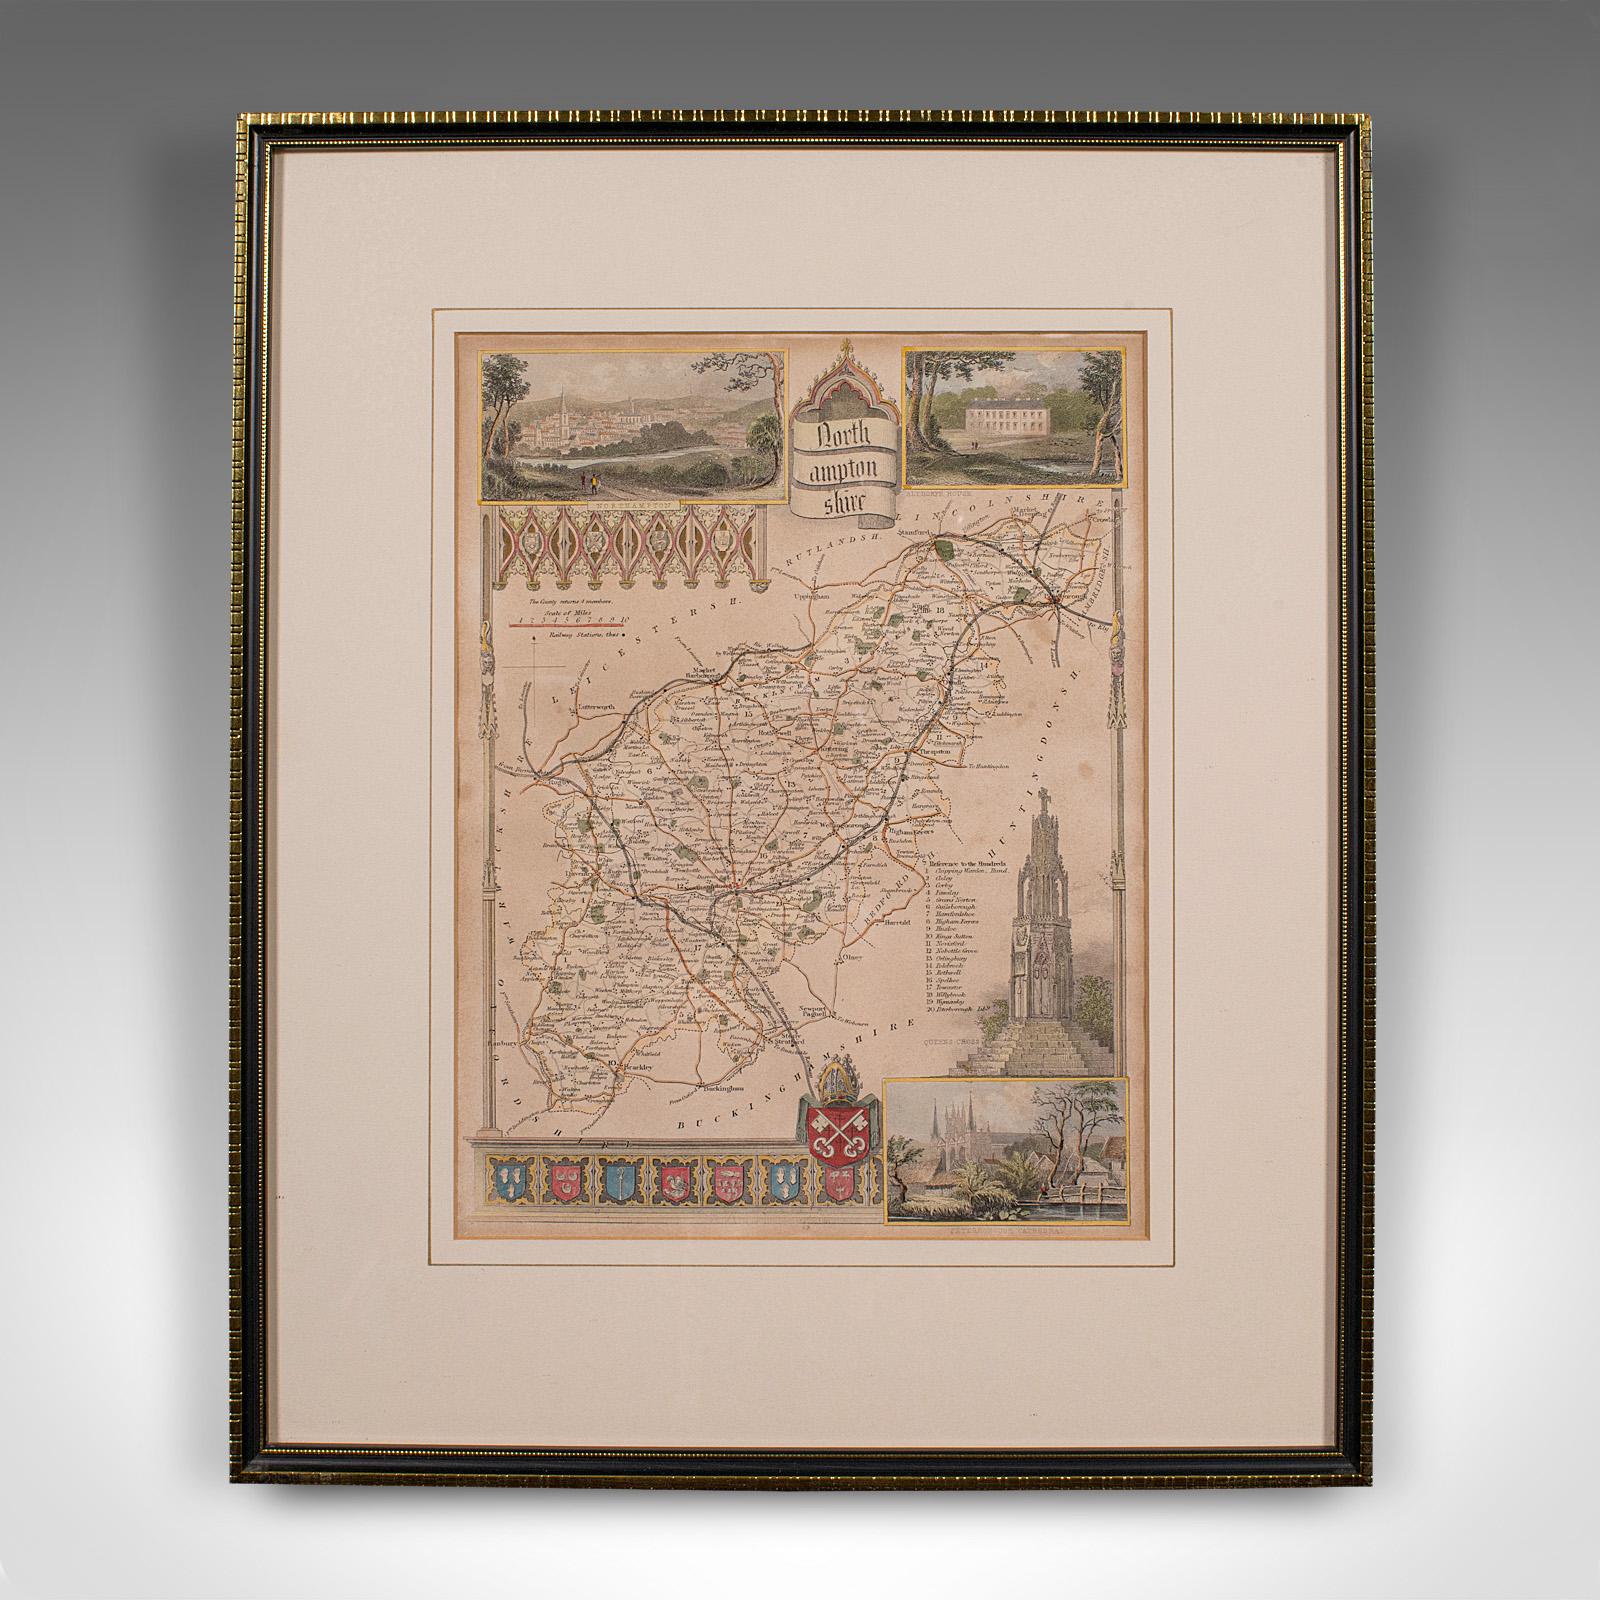 This is an antique lithography map of Hertfordshire. An English, framed atlas engraving of cartographic interest, dating to the mid 19th century and later.

Superb lithography of Hertfordshire and its county detail, perfect for display
Displaying a